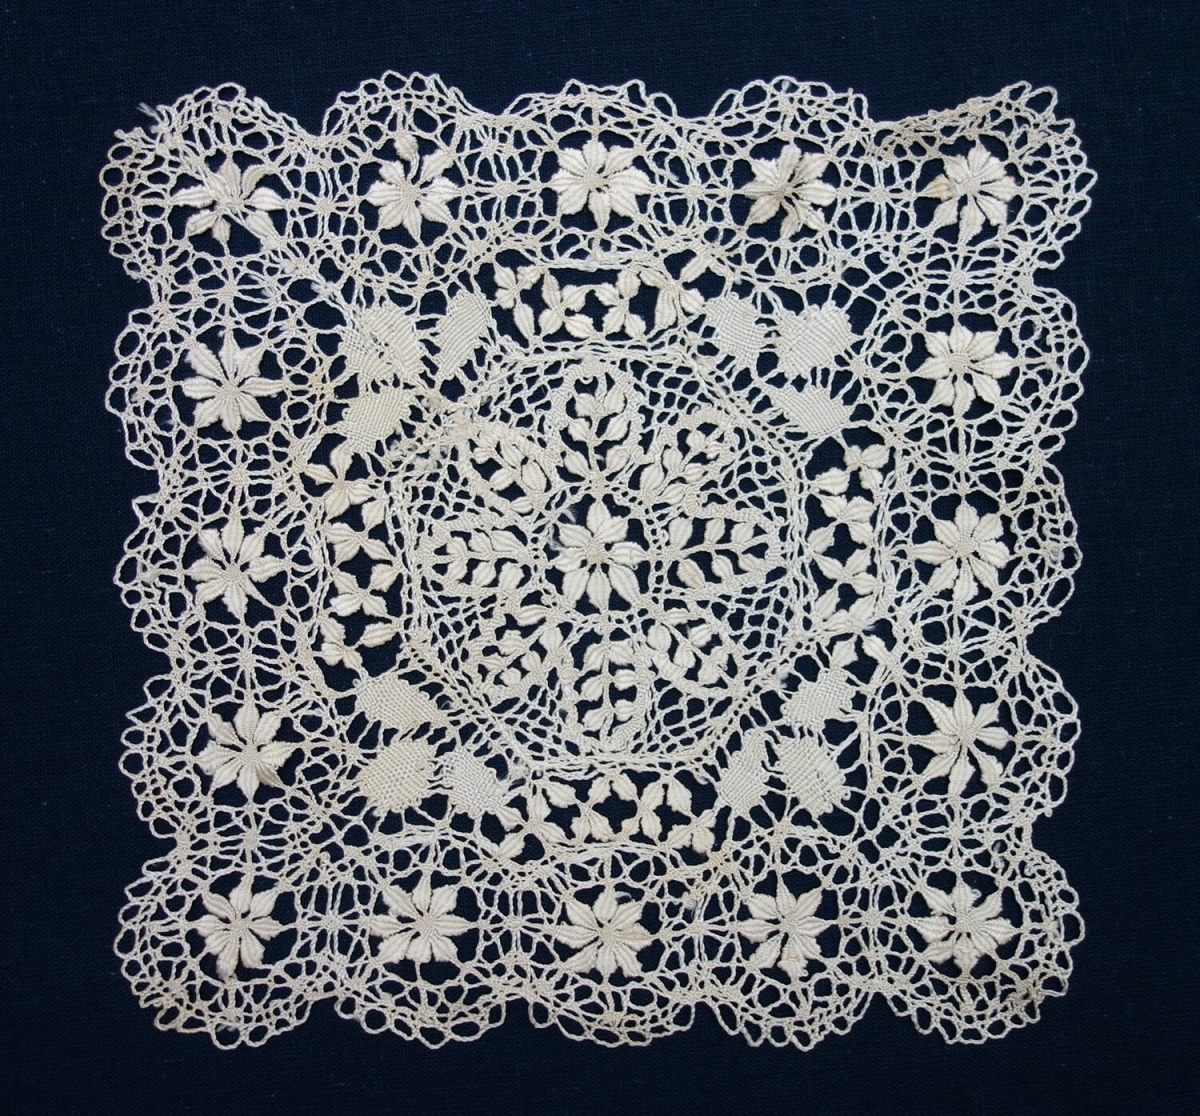 Small mat made of Maltese lace.